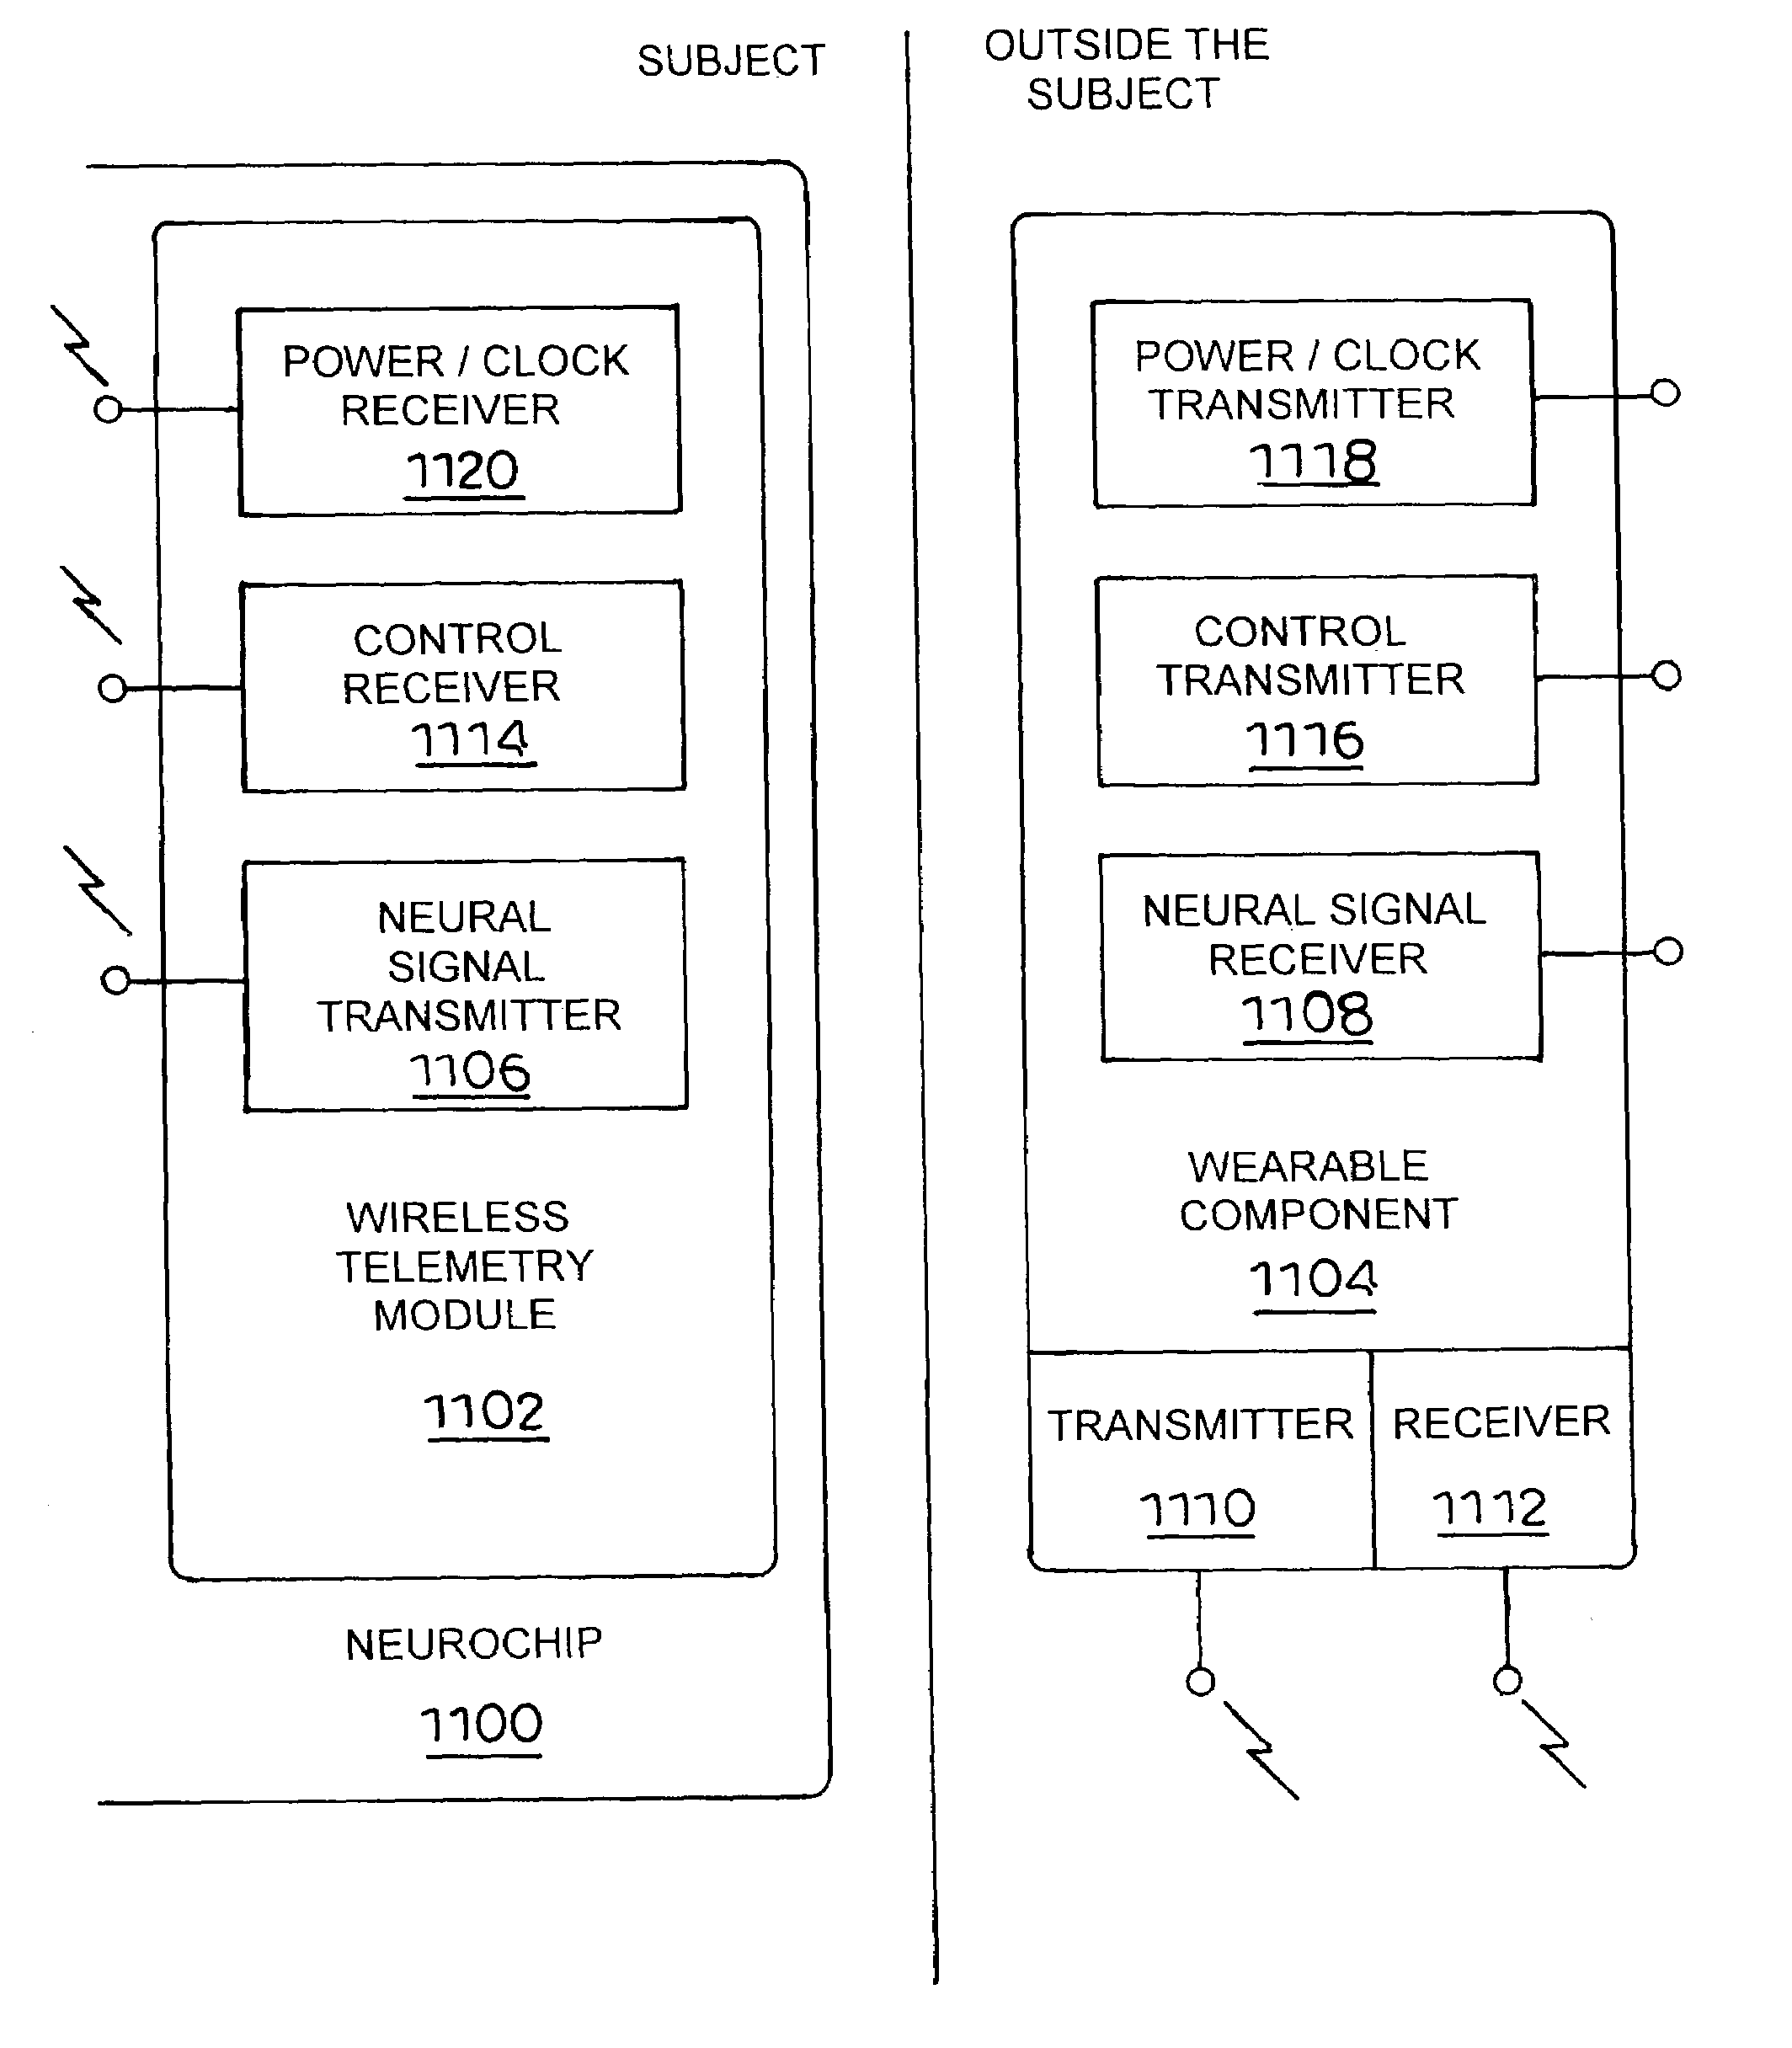 Apparatus for acquiring and transmitting neural signals and related methods